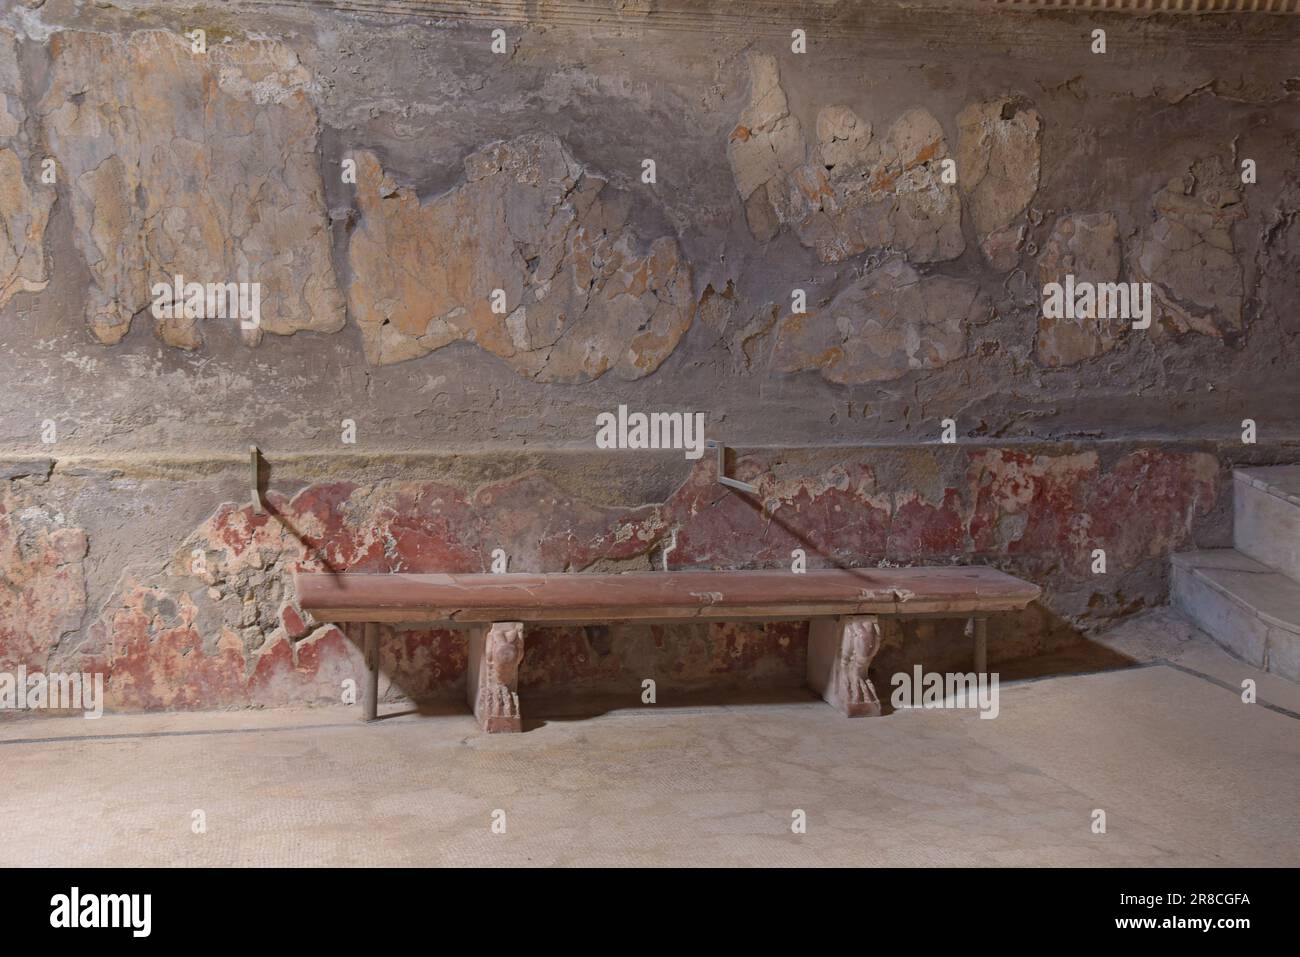 A stone bench in the public baths at the  Roman town of Herculaneum, buried in the Vesuvius eruption AD79, Ercolano, Naples, Italy Stock Photo